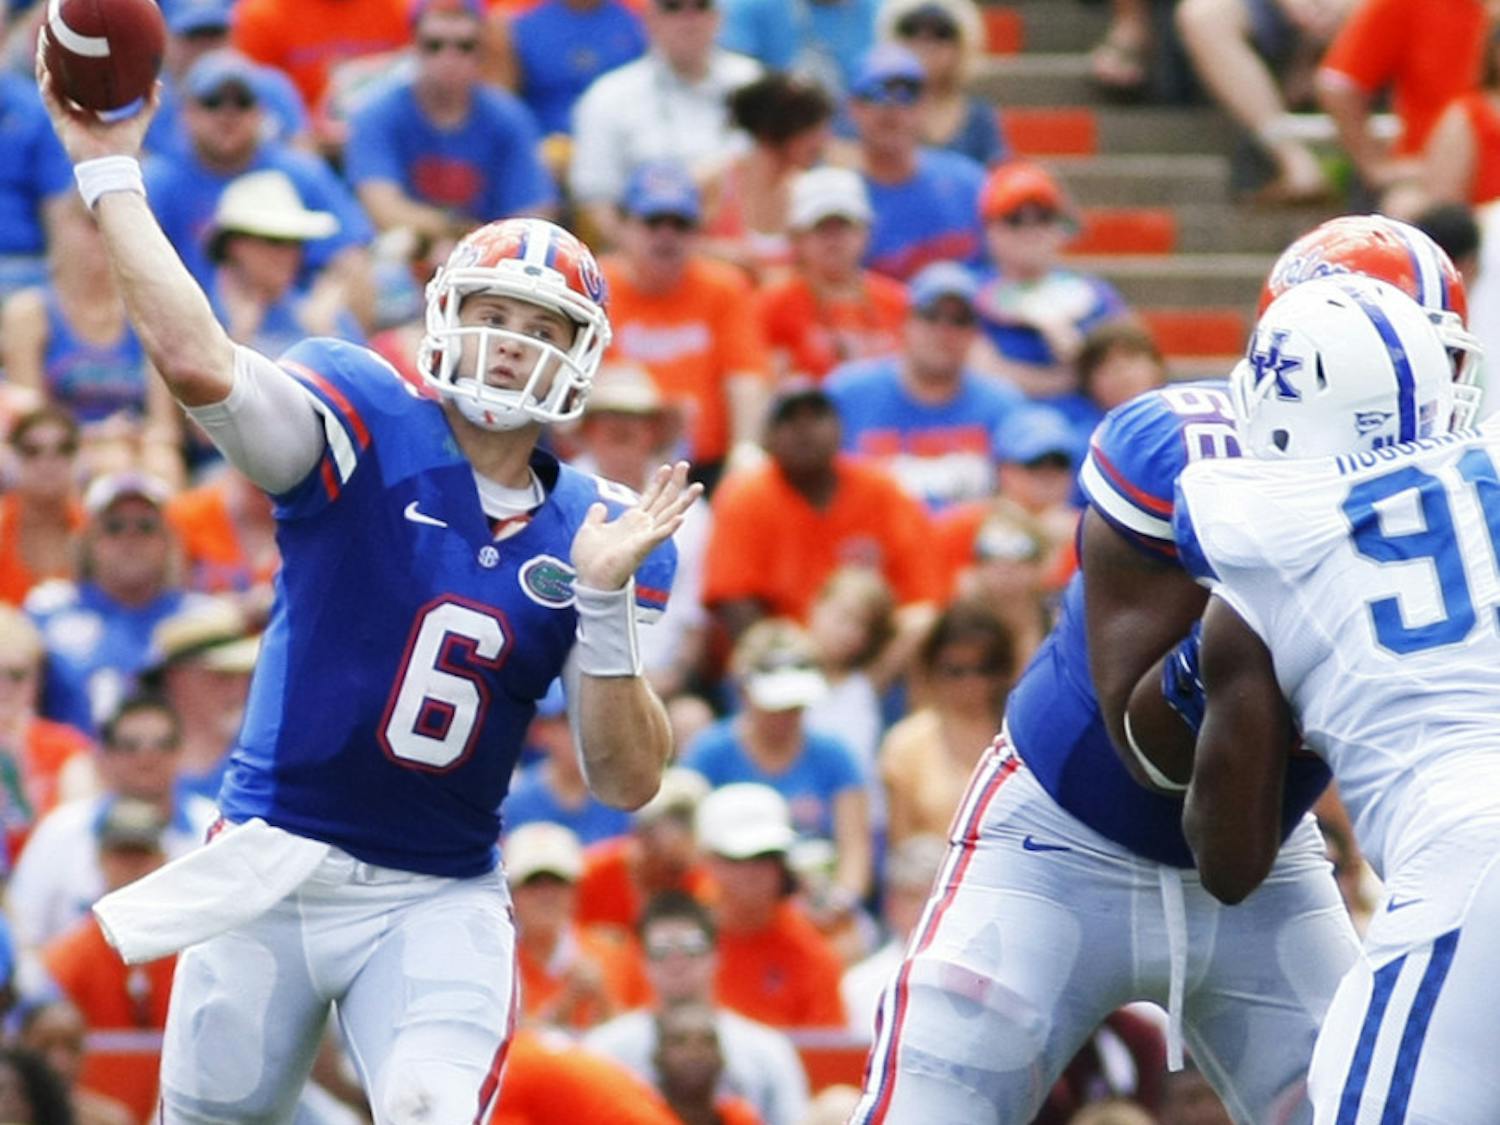 Jeff Driskel throws a pass during Florida’s 38-0 win against Kentucky at Ben Hill Griffin Stadium on Sept. 22, 2012. Driskel is the first-team starter at quarterback.